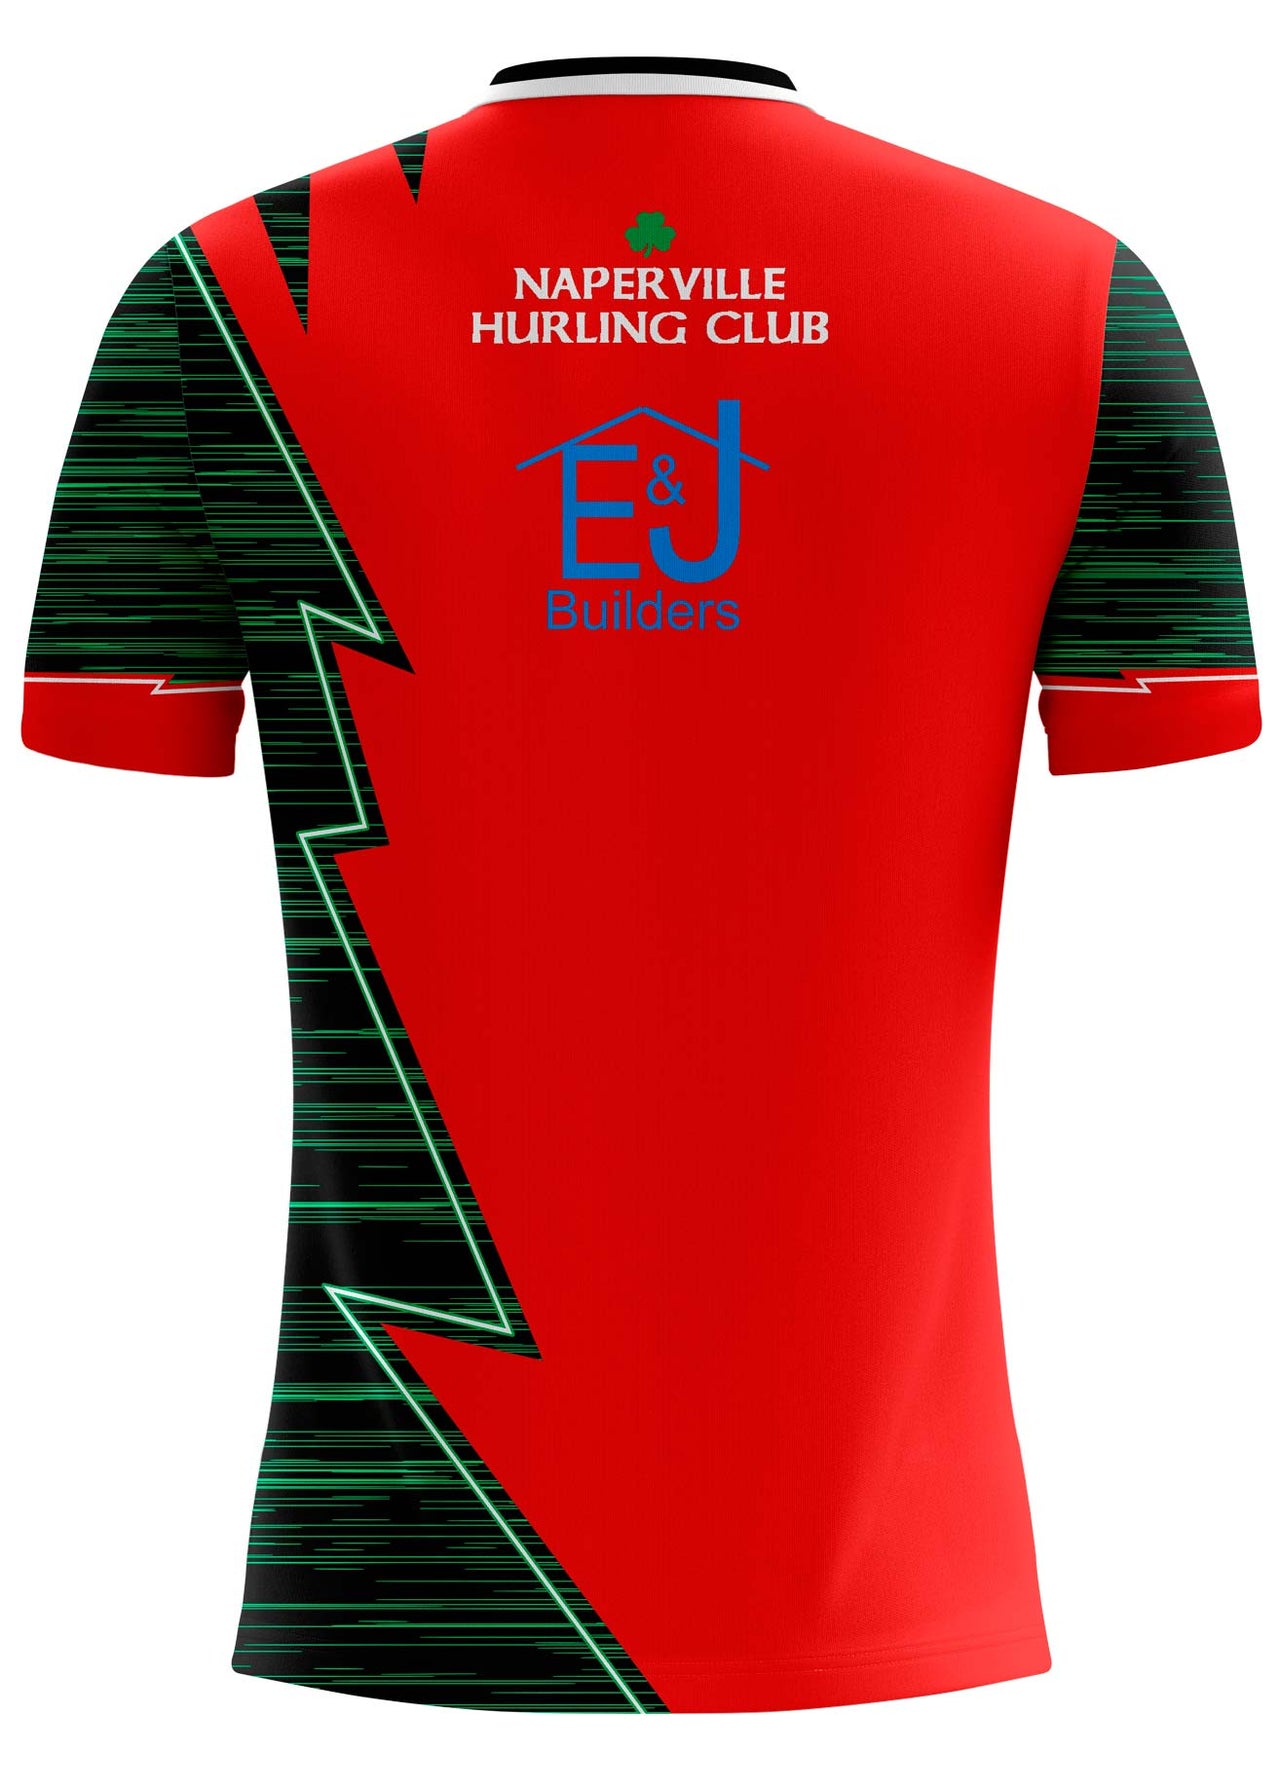 Naperville Hurling Club Clarke Red Jersey Player Fit Adult